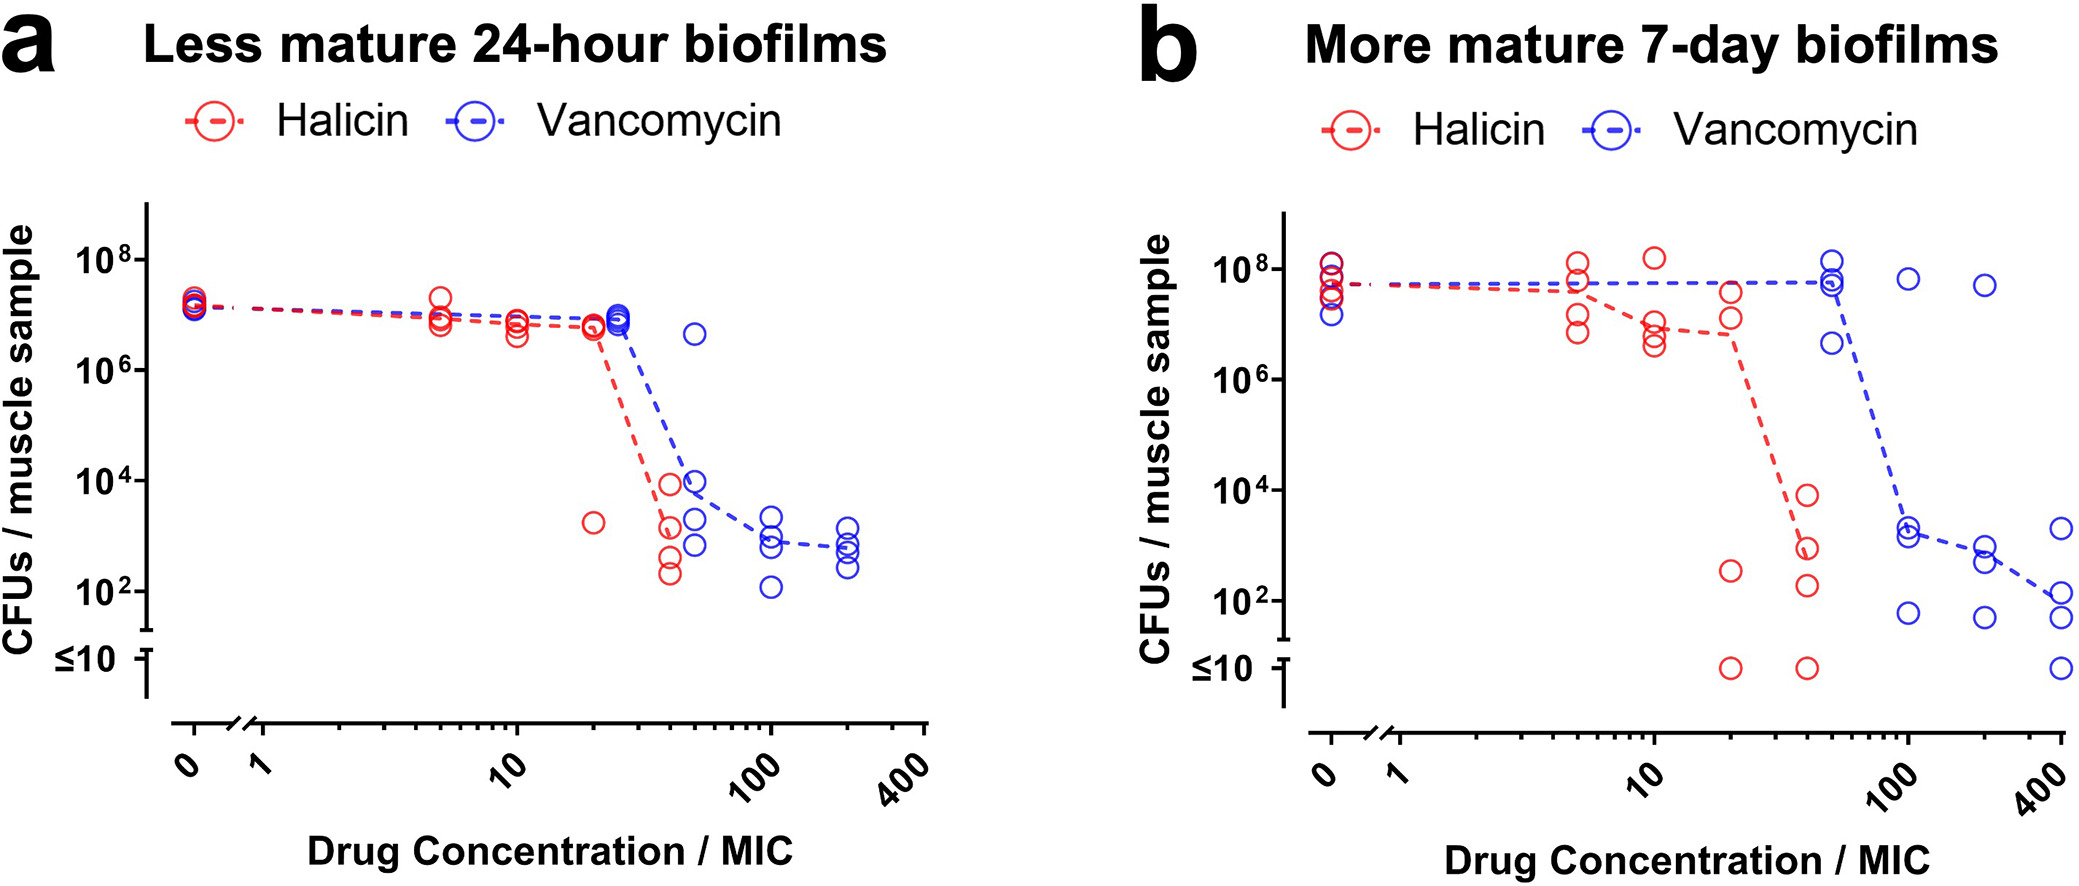 Fig. 4 
          Halicin remains active against Staphylococcus aureus-Xen36 biofilms grown on devitalized muscle. a) Less mature 24-hour biofilms and b) more mature seven-day biofilms on muscle samples were exposed to the indicated concentrations of halicin (red symbols) or vancomycin (blue symbols) for 20 hours. Effects on biofilm viability were determined by CFU assays. Dashed lines connect medians of four independent experiments for each drug concentration. Each symbol denotes the median for each drug concentration from an independent experiment, with three muscle samples per symbol.
        